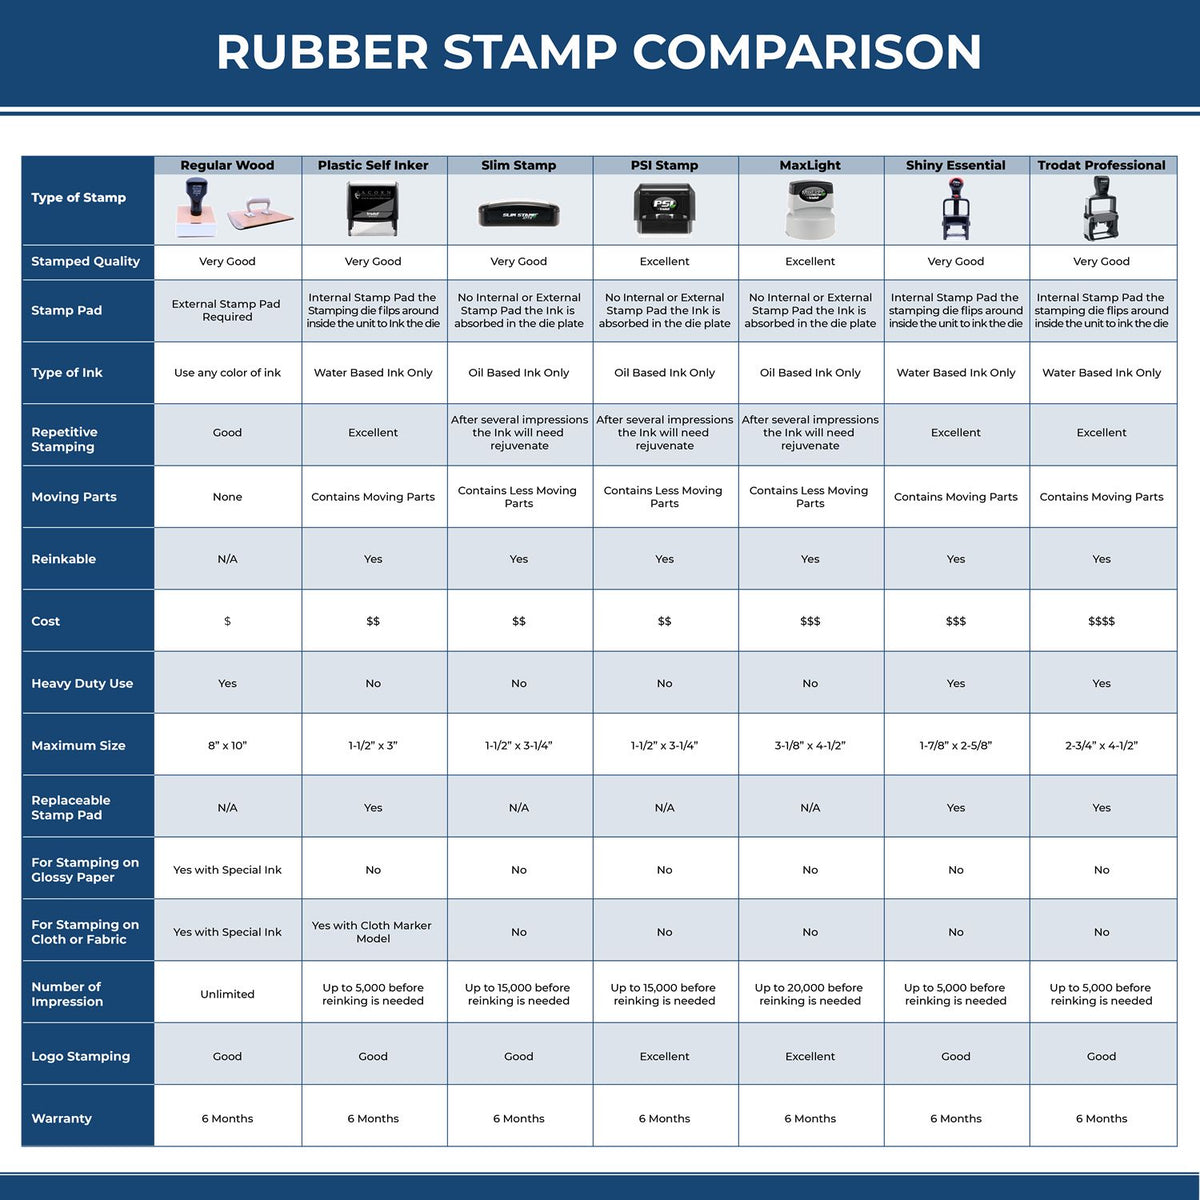 Large Self Inking Second Notice Stamp 4155S Rubber Stamp Comparison